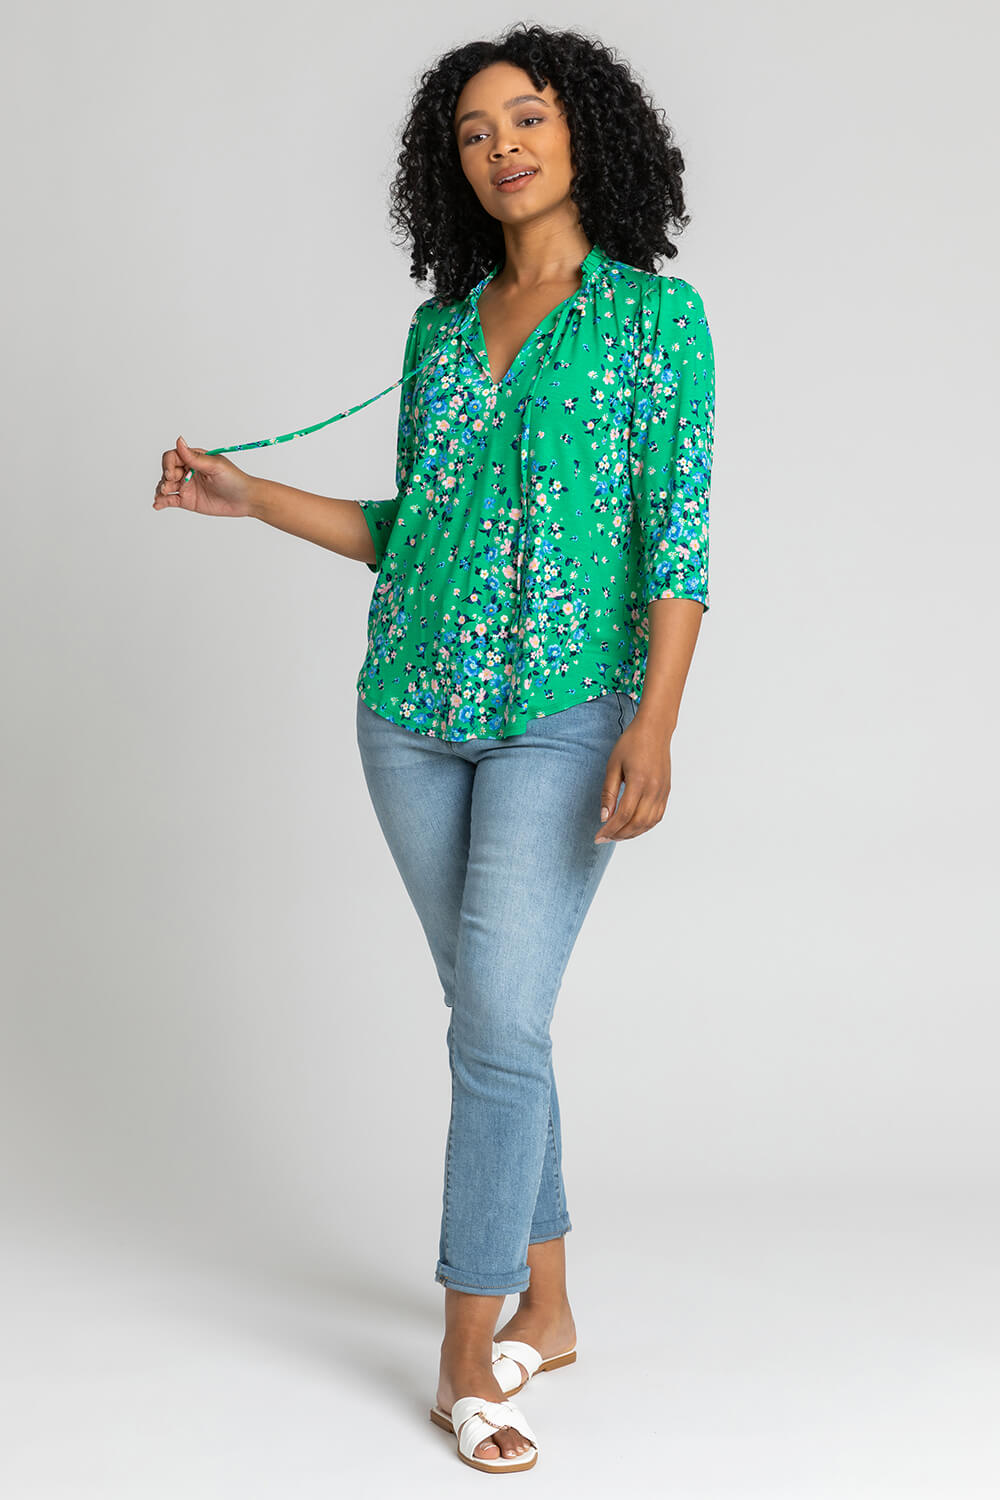 Green Petite Floral Print Tie Neck Top, Image 3 of 5